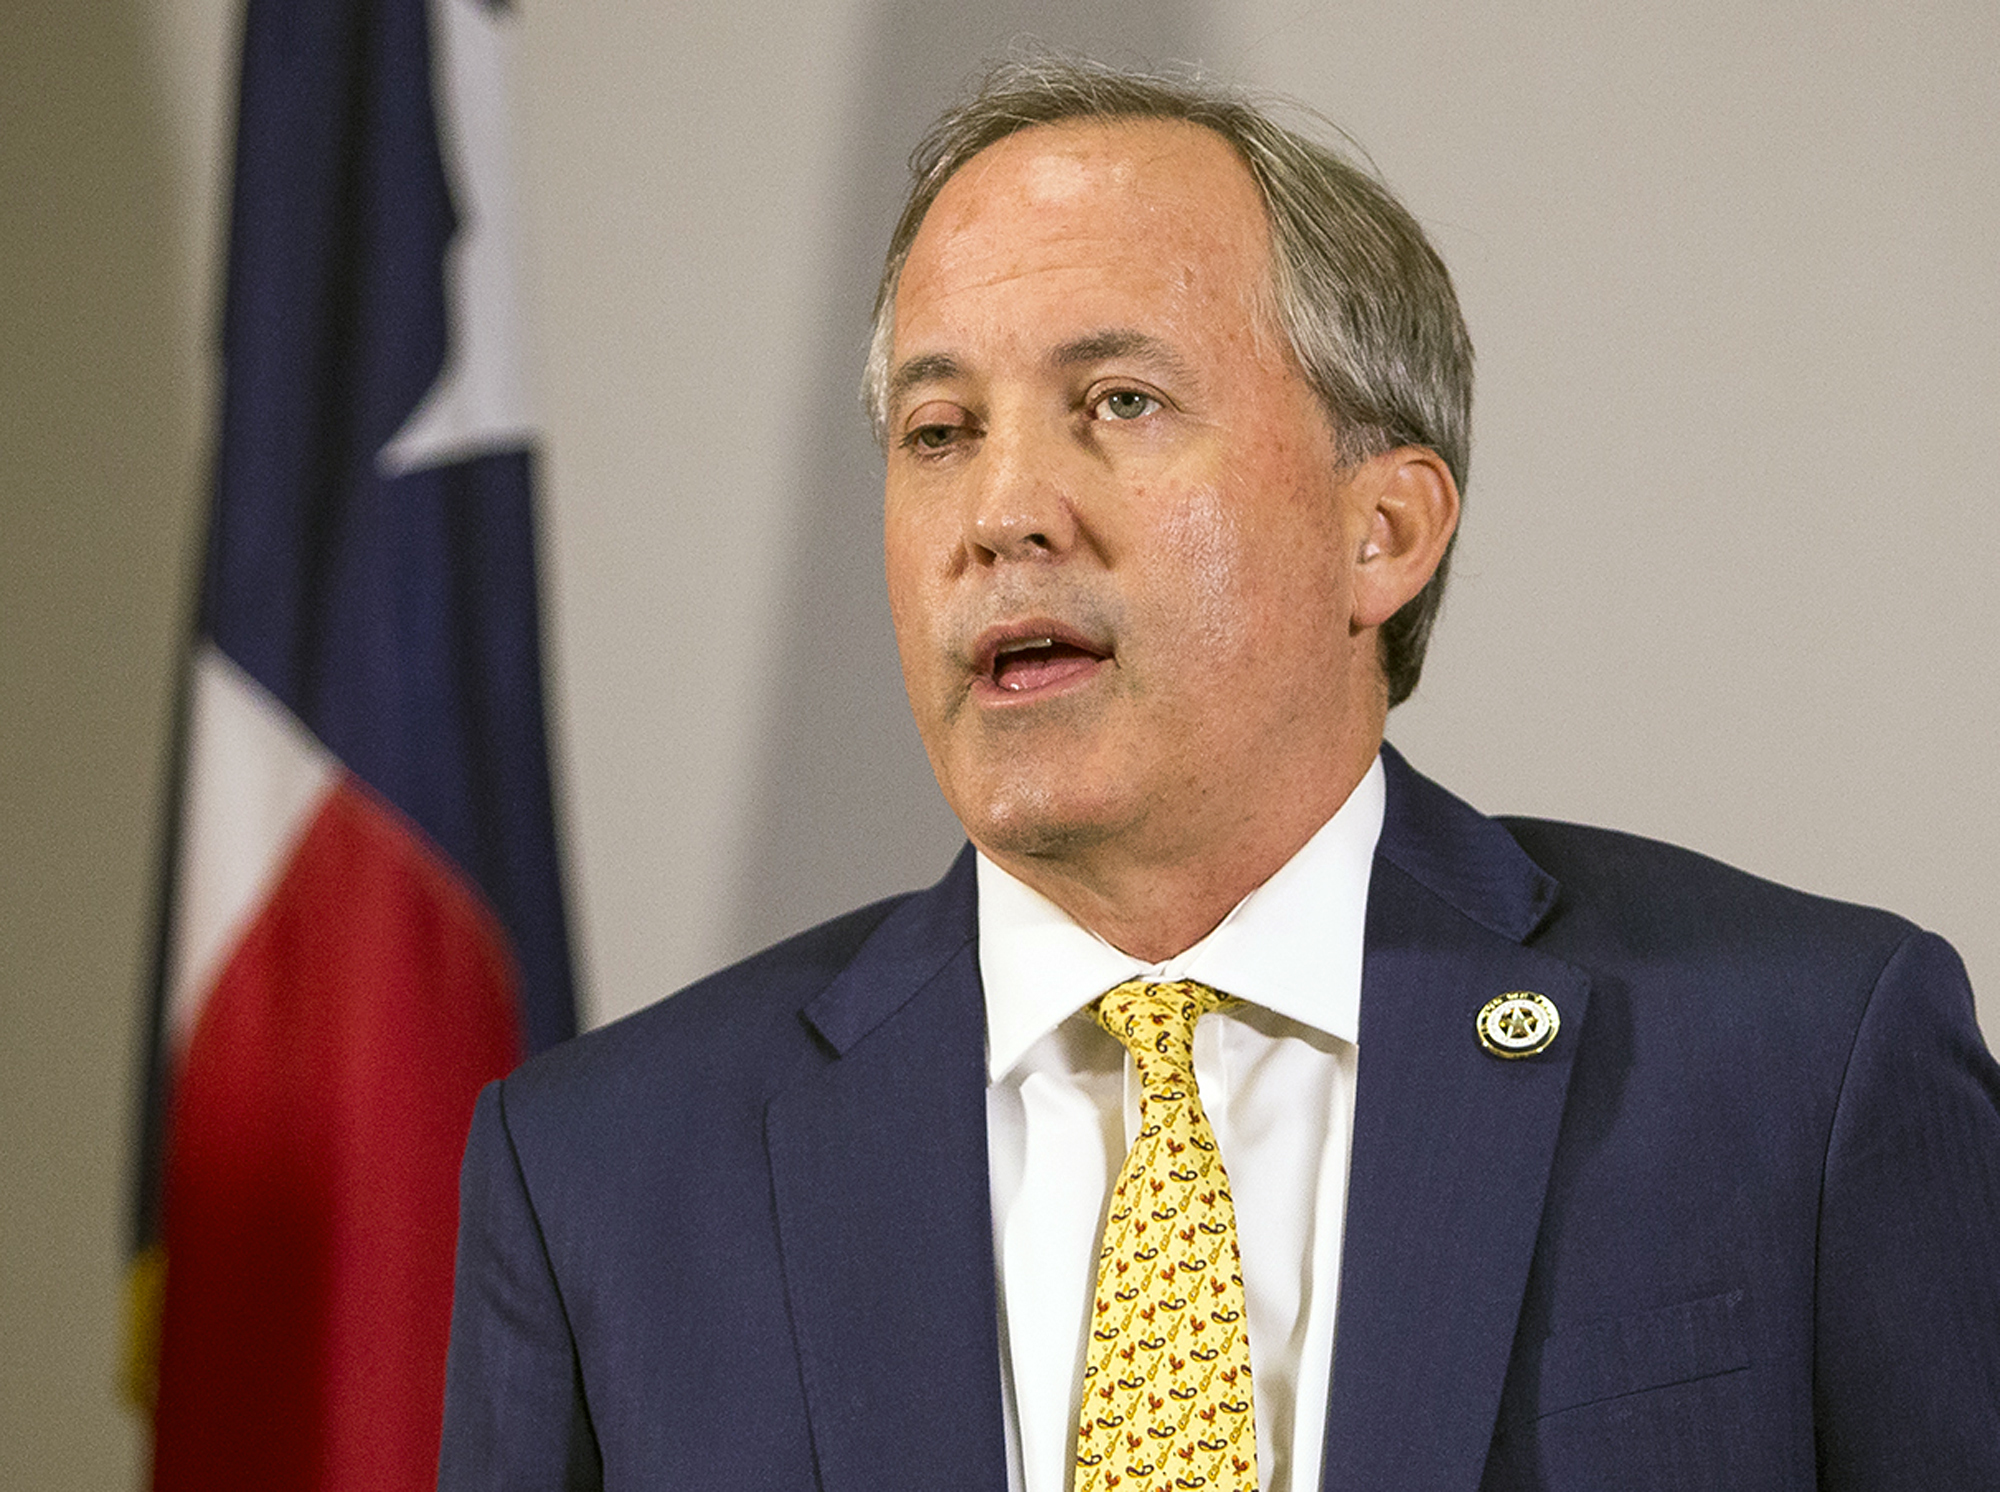 In this May 1, 2018, file photo, Texas Attorney General Ken Paxton speaks at a news conference in Austin, Texas. (Nick Wagner&mdash;AP)